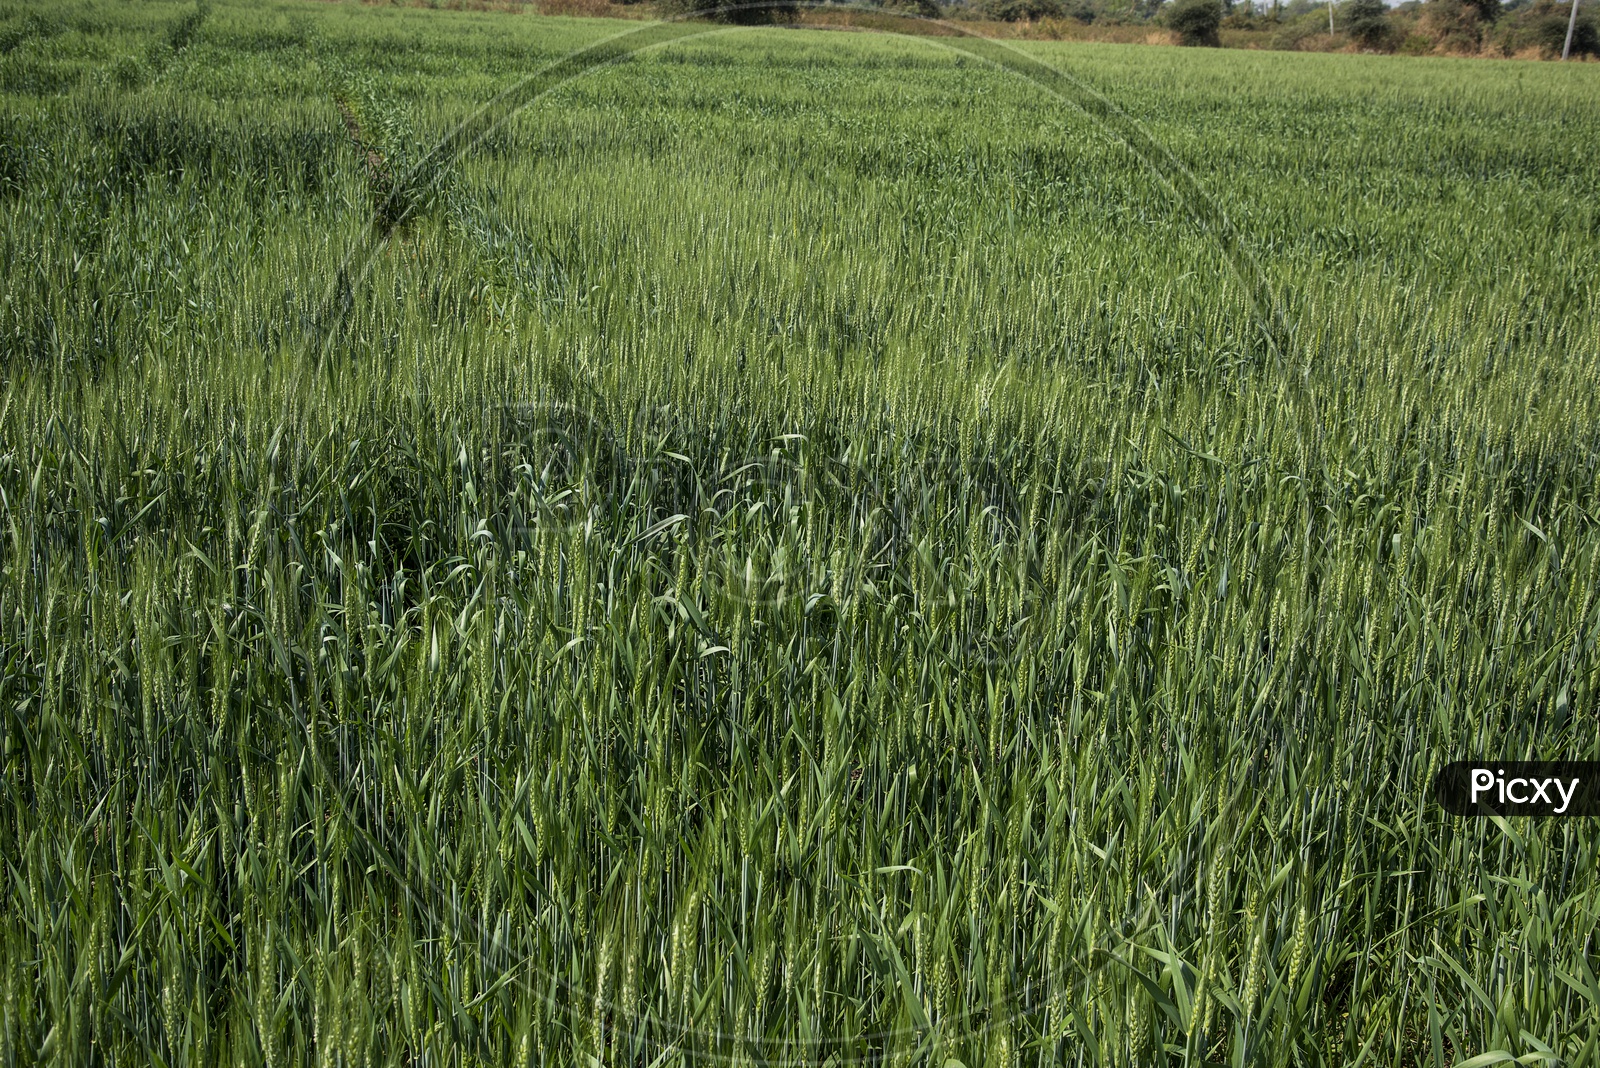 Young Green Wheat Ears In an Agricultural Field